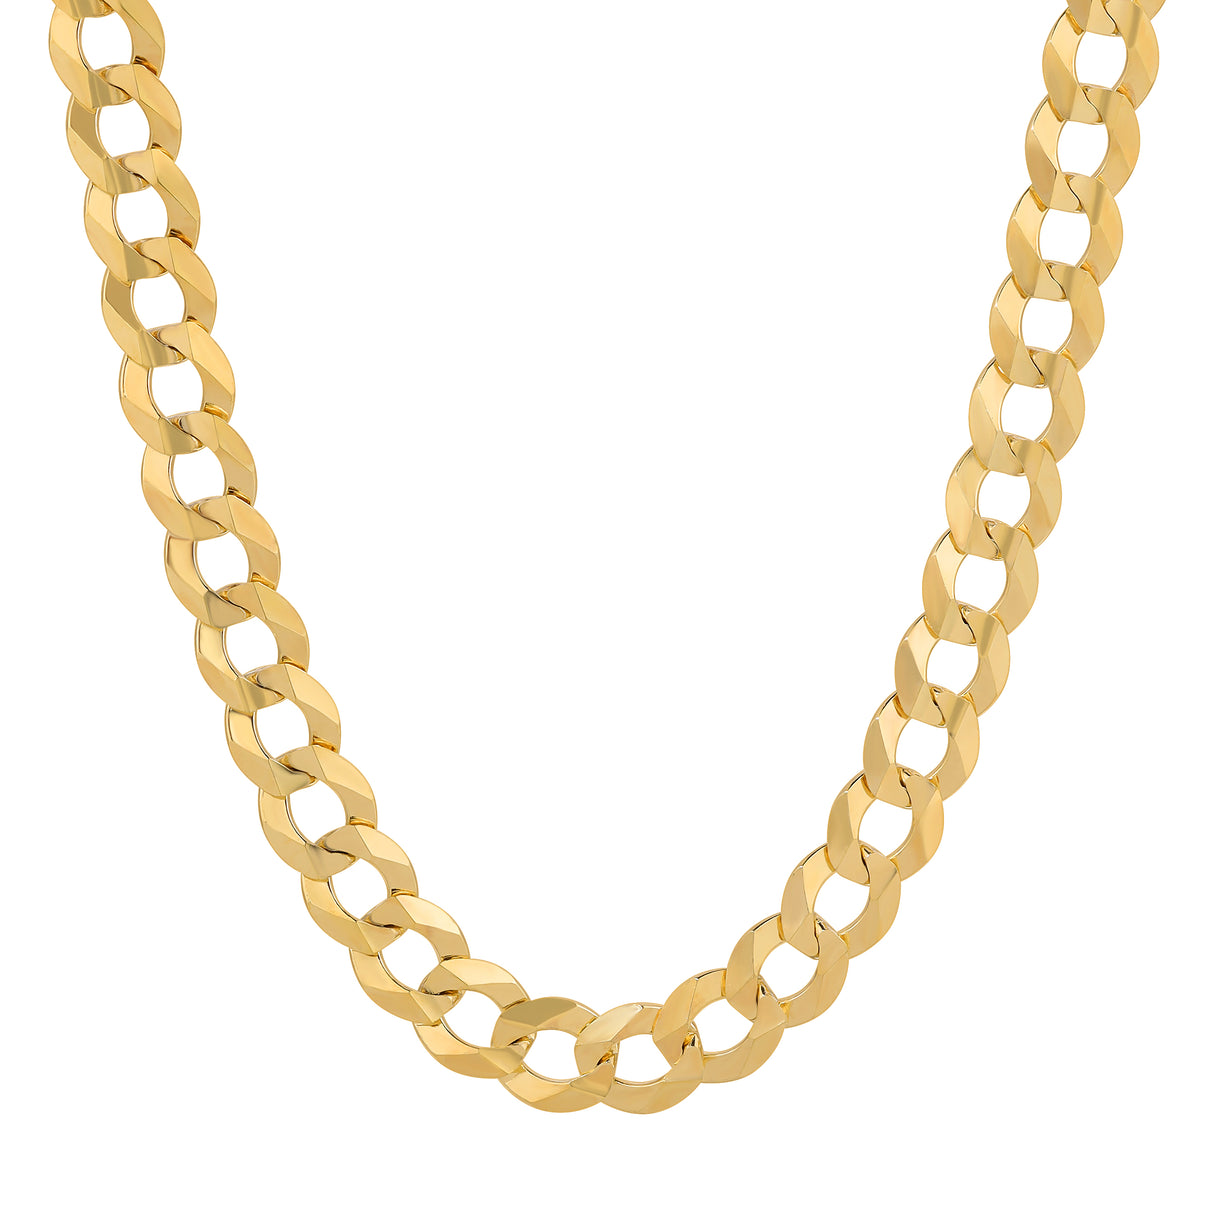 Luxury Gold Chains Cuban Link | 10K REAL Hollow Yellow Gold Diamond Cut Curb CUBAN Chain Necklace 